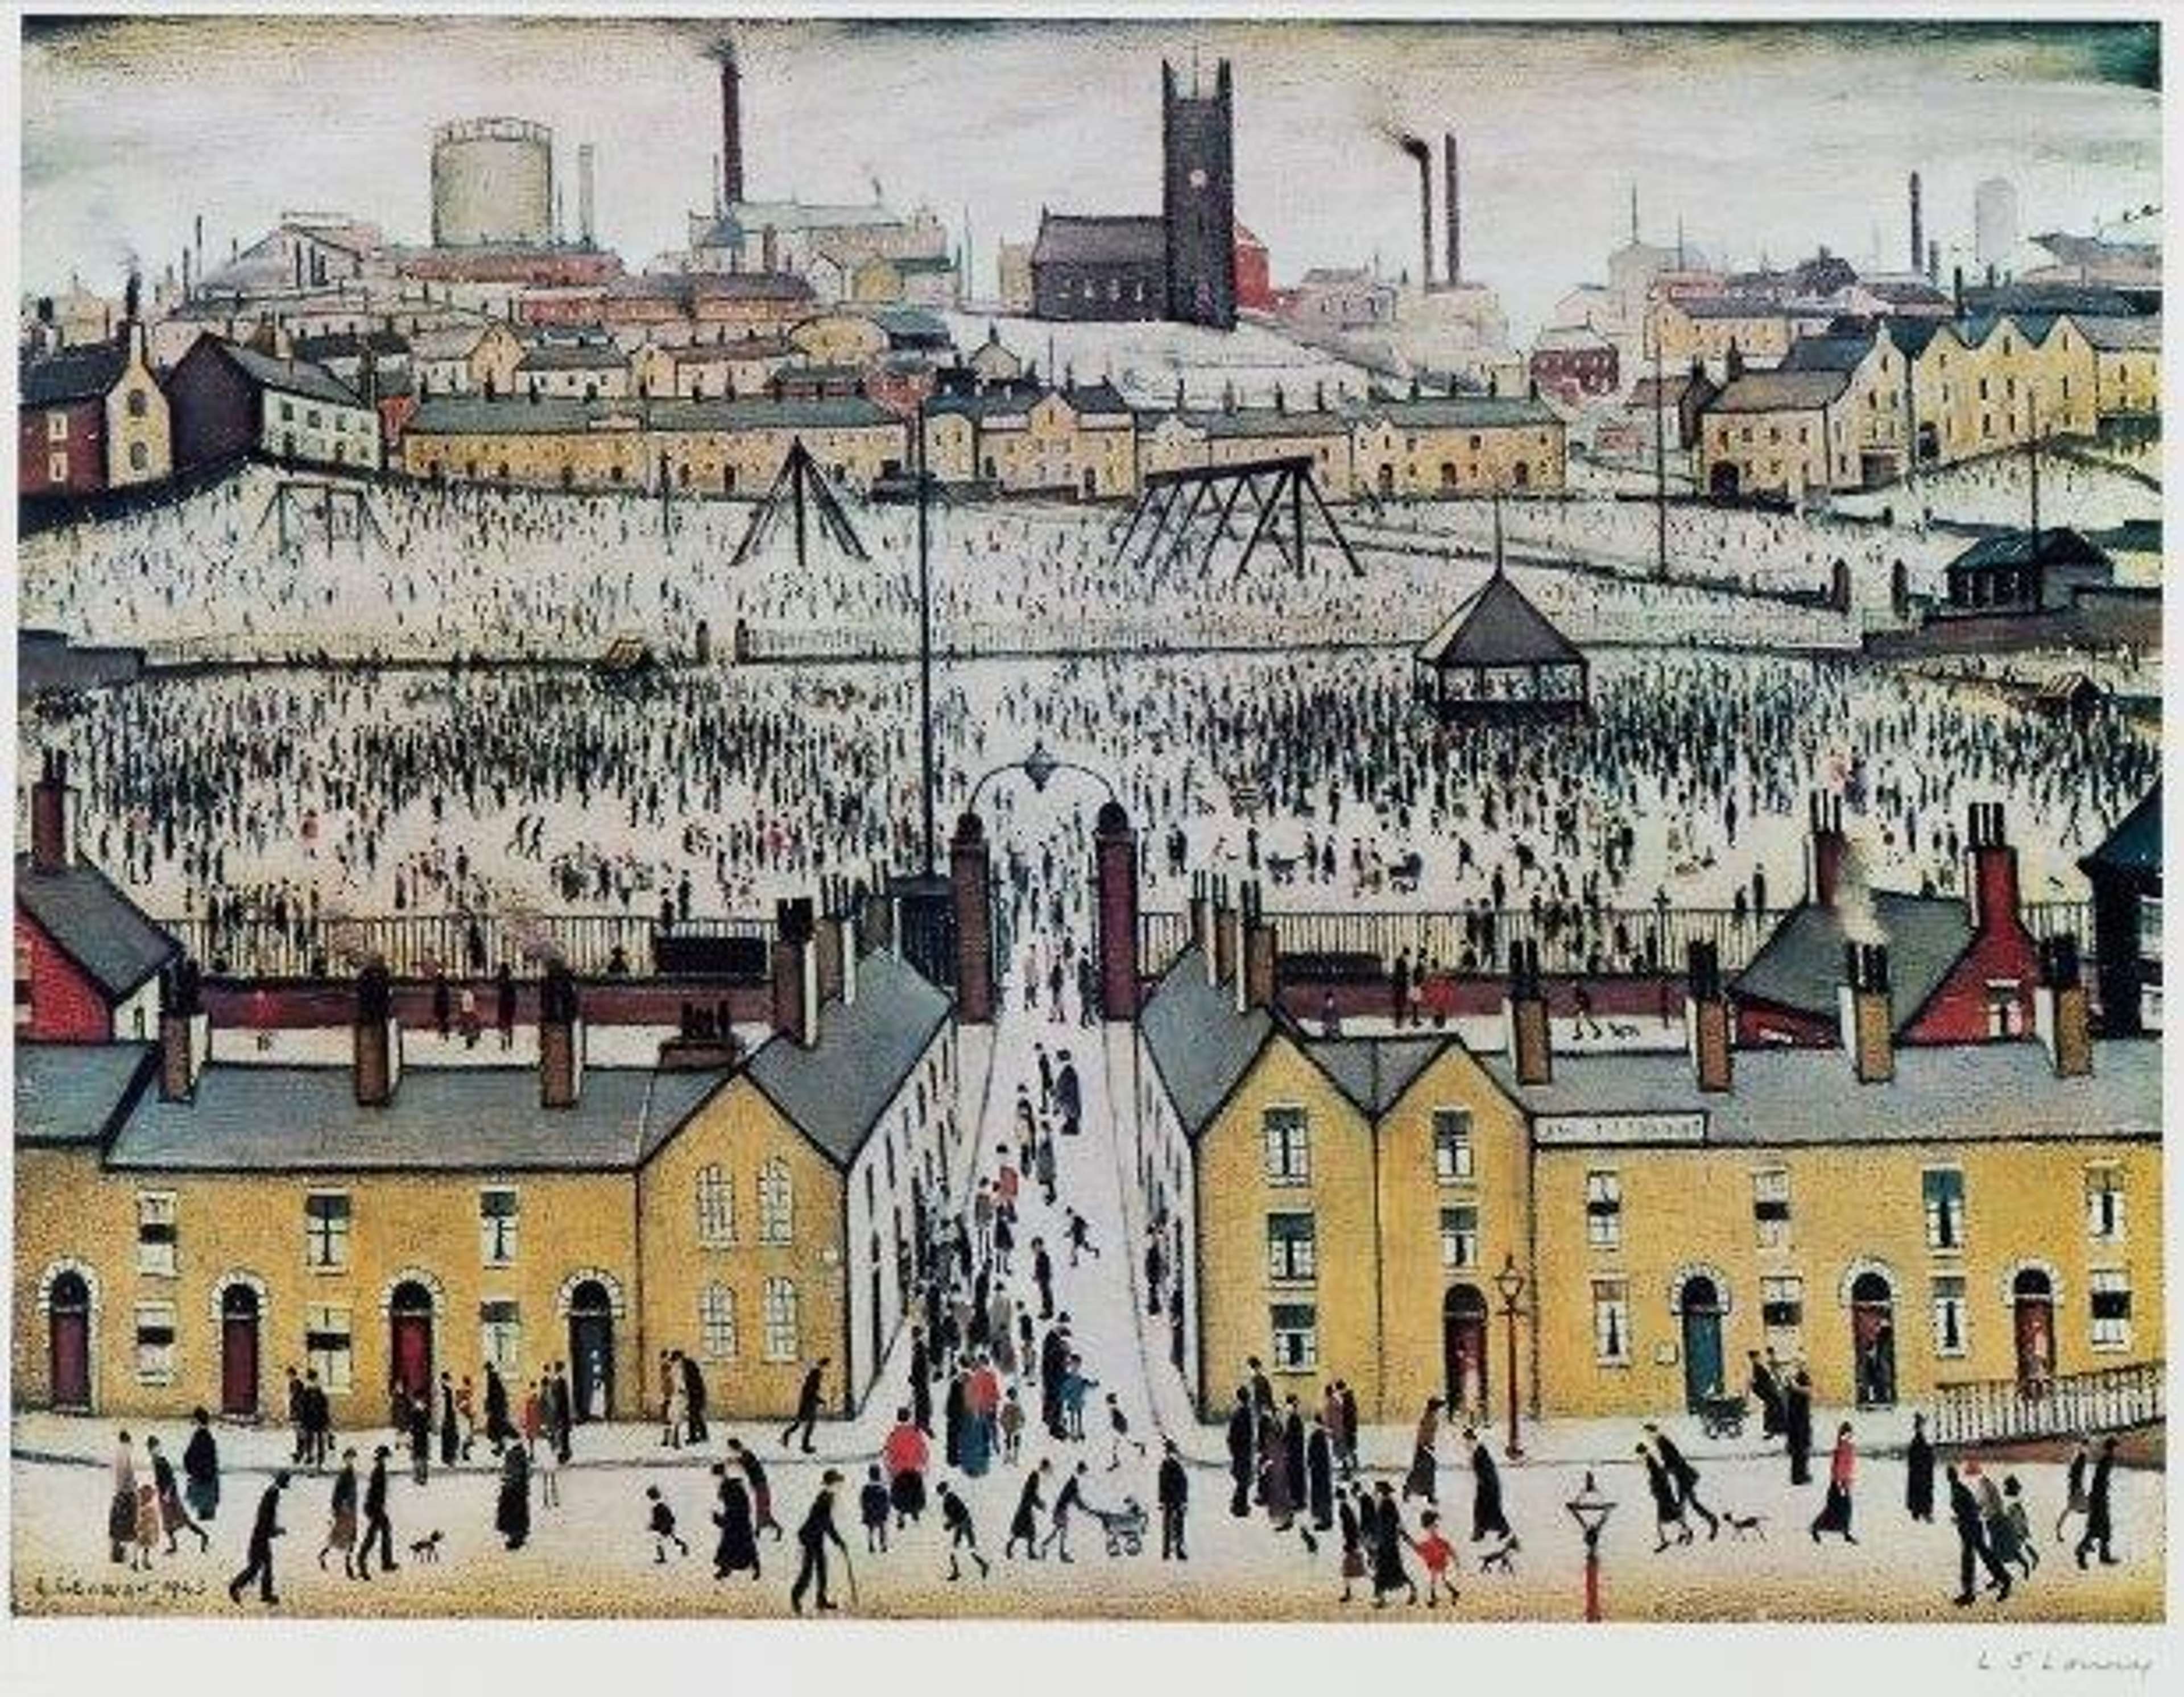 Britain At Play by L S Lowry - MyArtBroker